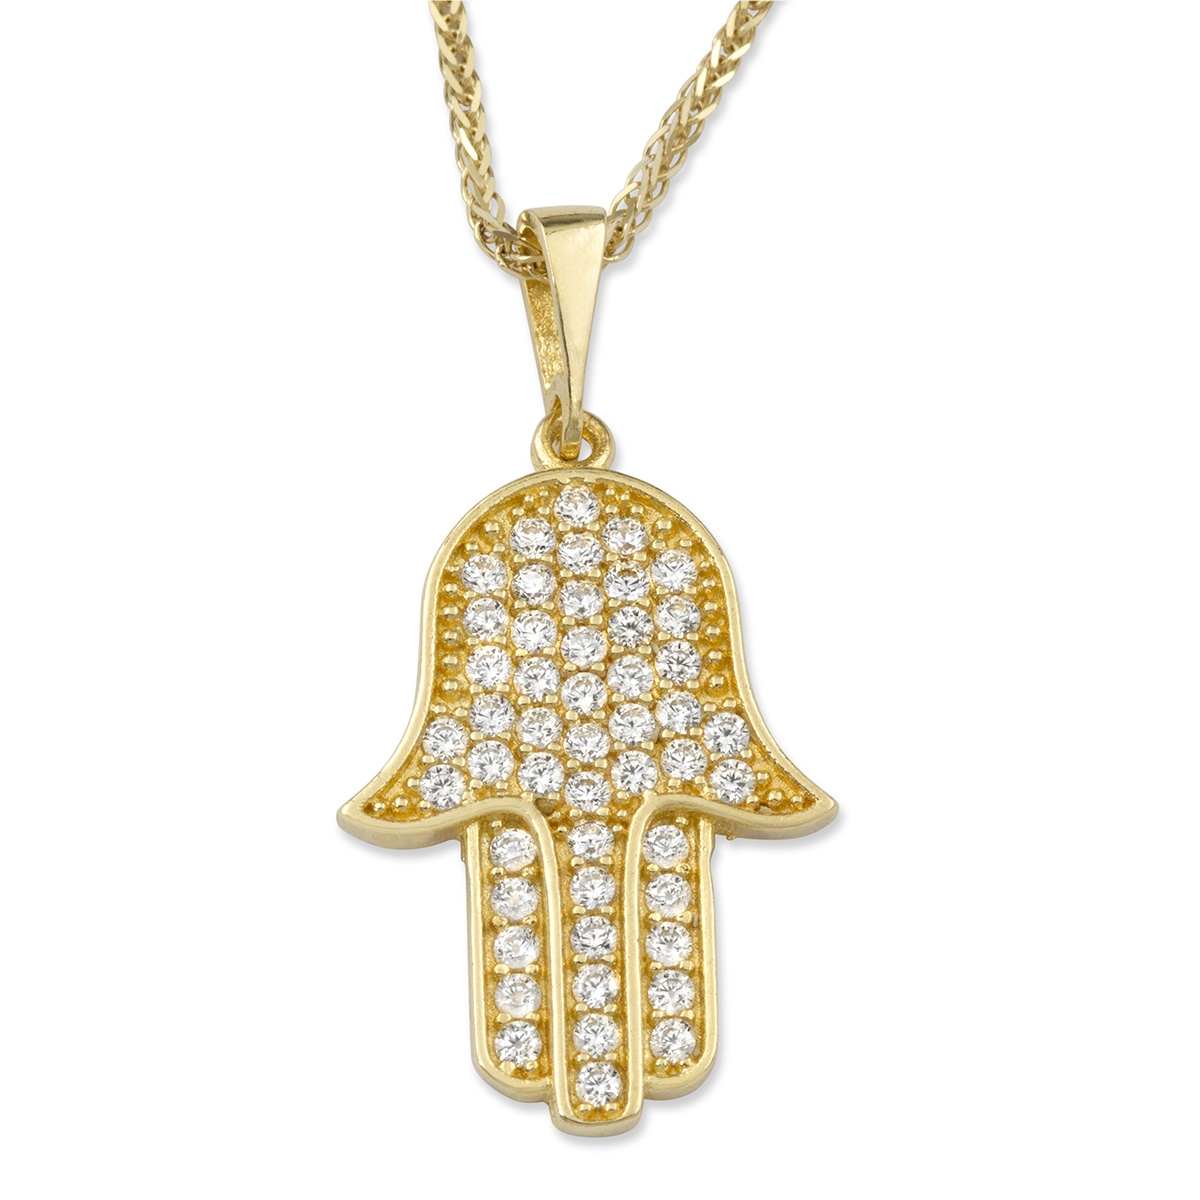 Luxurious 14K Yellow Gold Hamsa Pendant Necklace With Cubic Zirconia Accent - 1